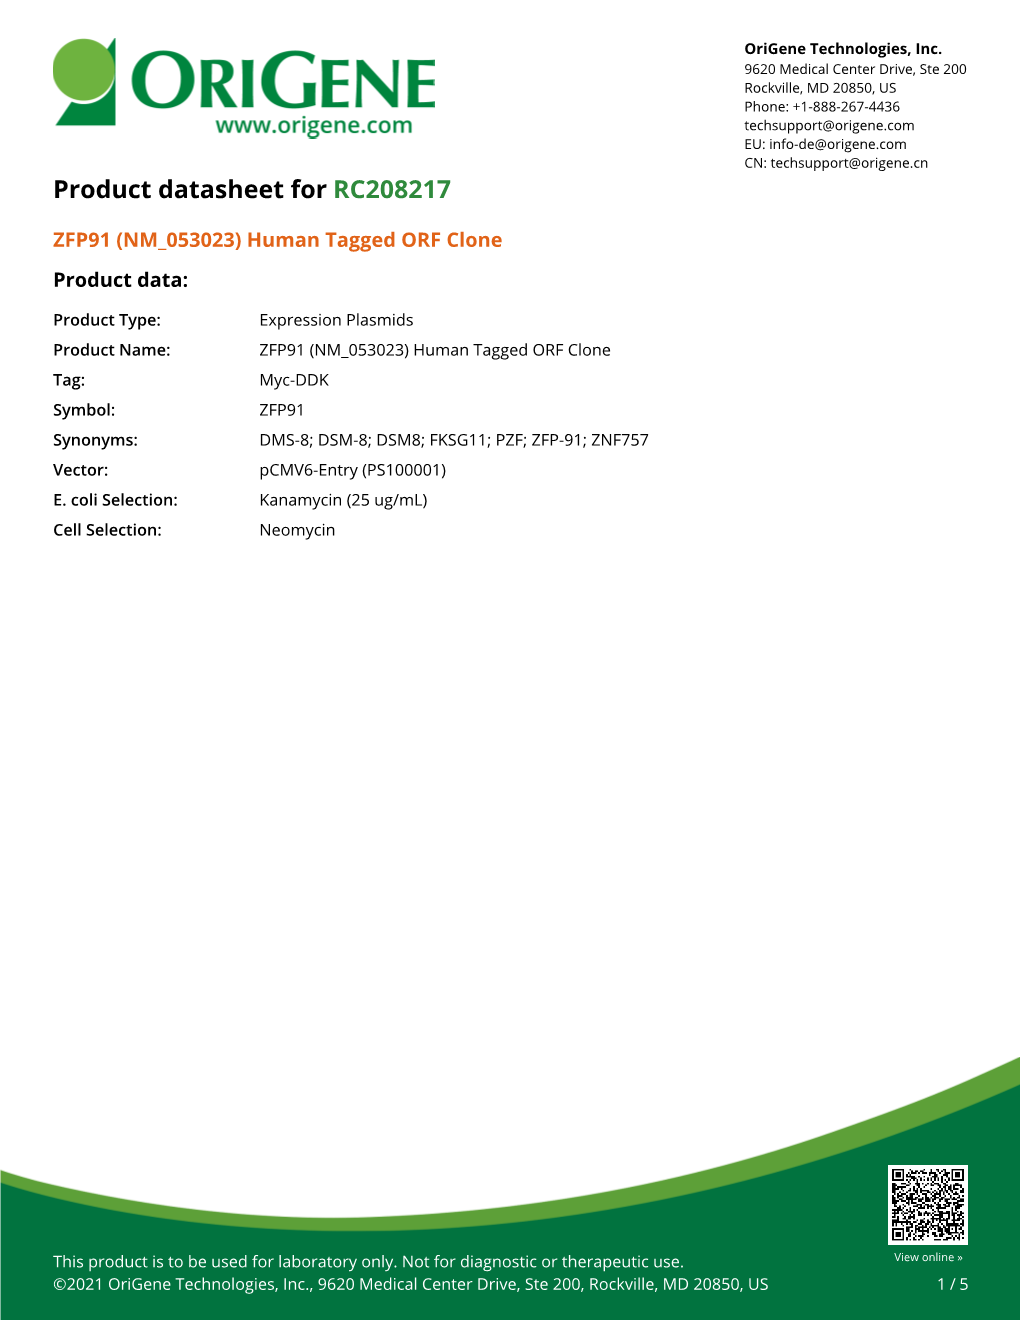 ZFP91 (NM 053023) Human Tagged ORF Clone Product Data